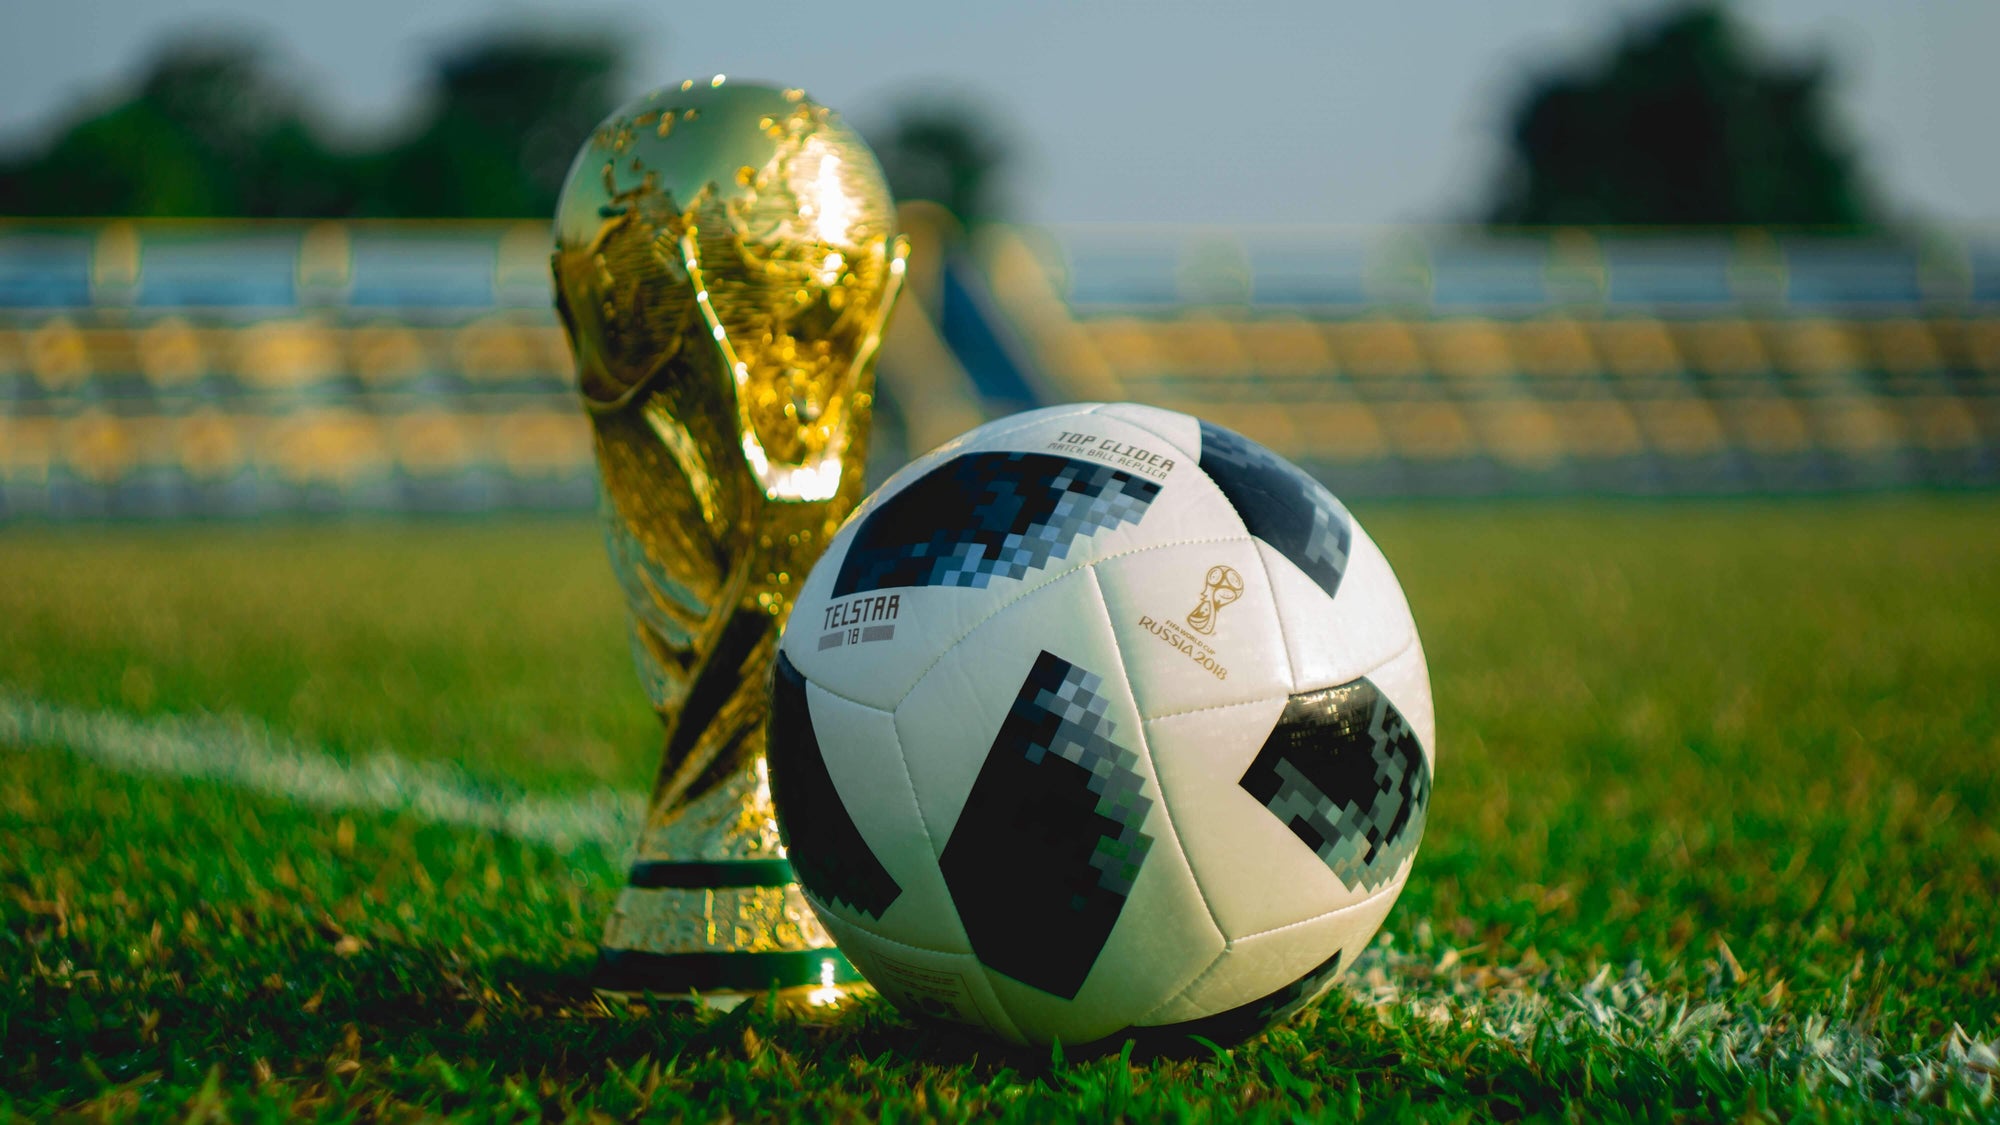 FIFA World Cup As The Global Sport Event